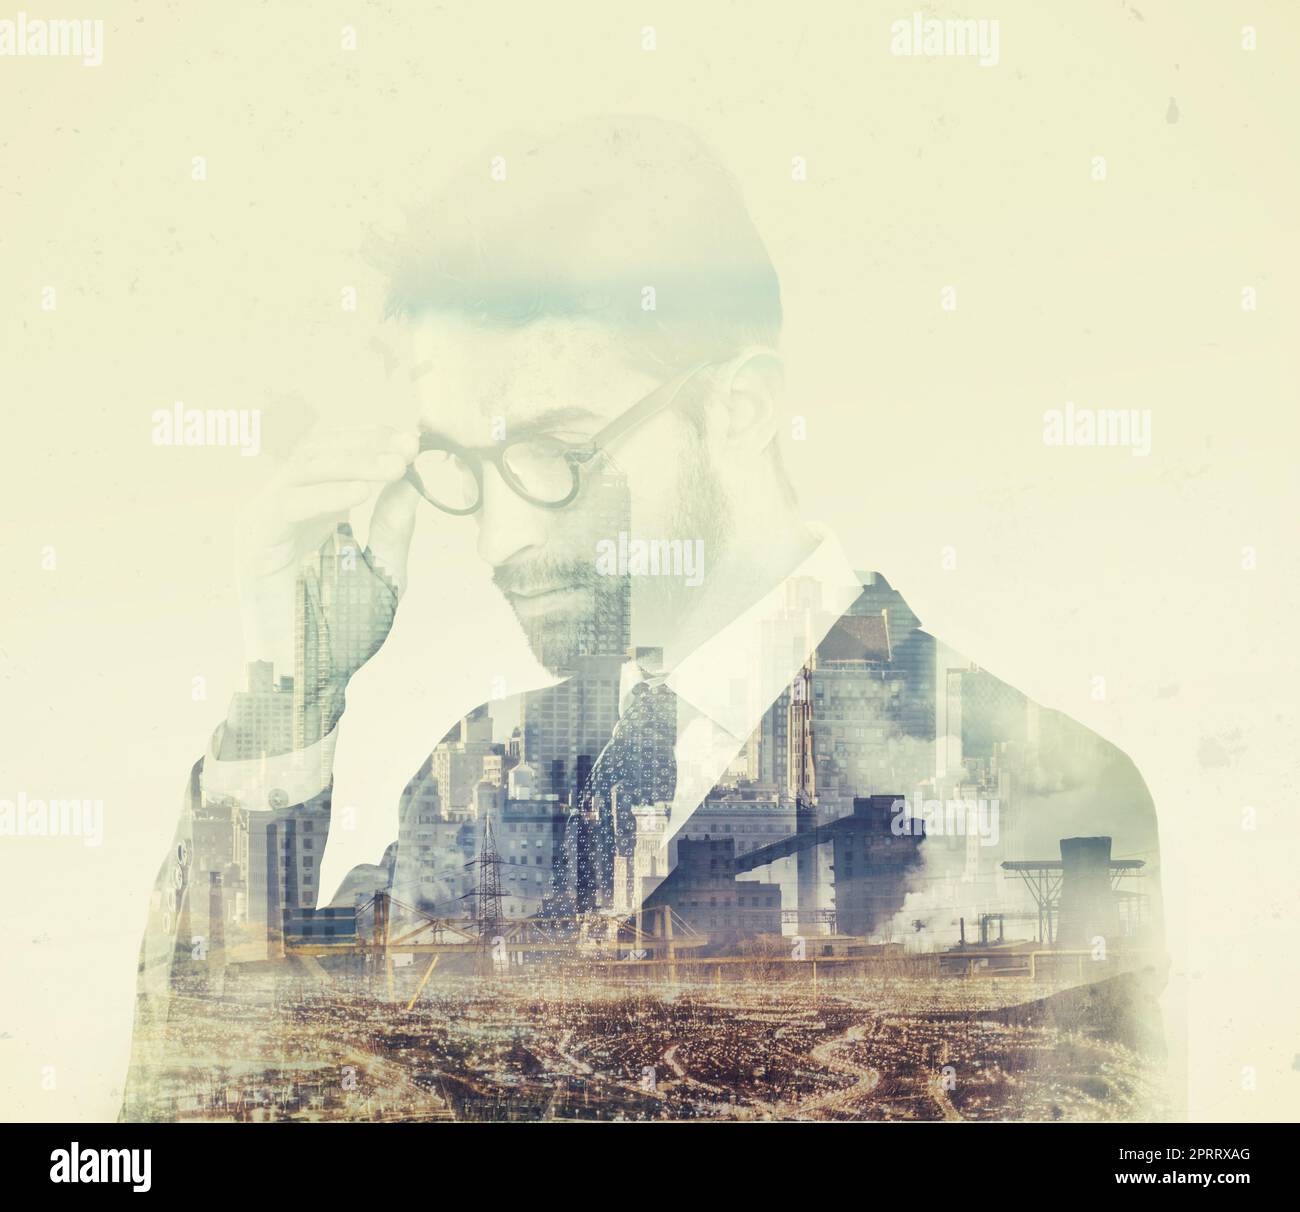 The thinking mans city. Composite image of a well-dressed man superimposed on an image of urban development. Stock Photo